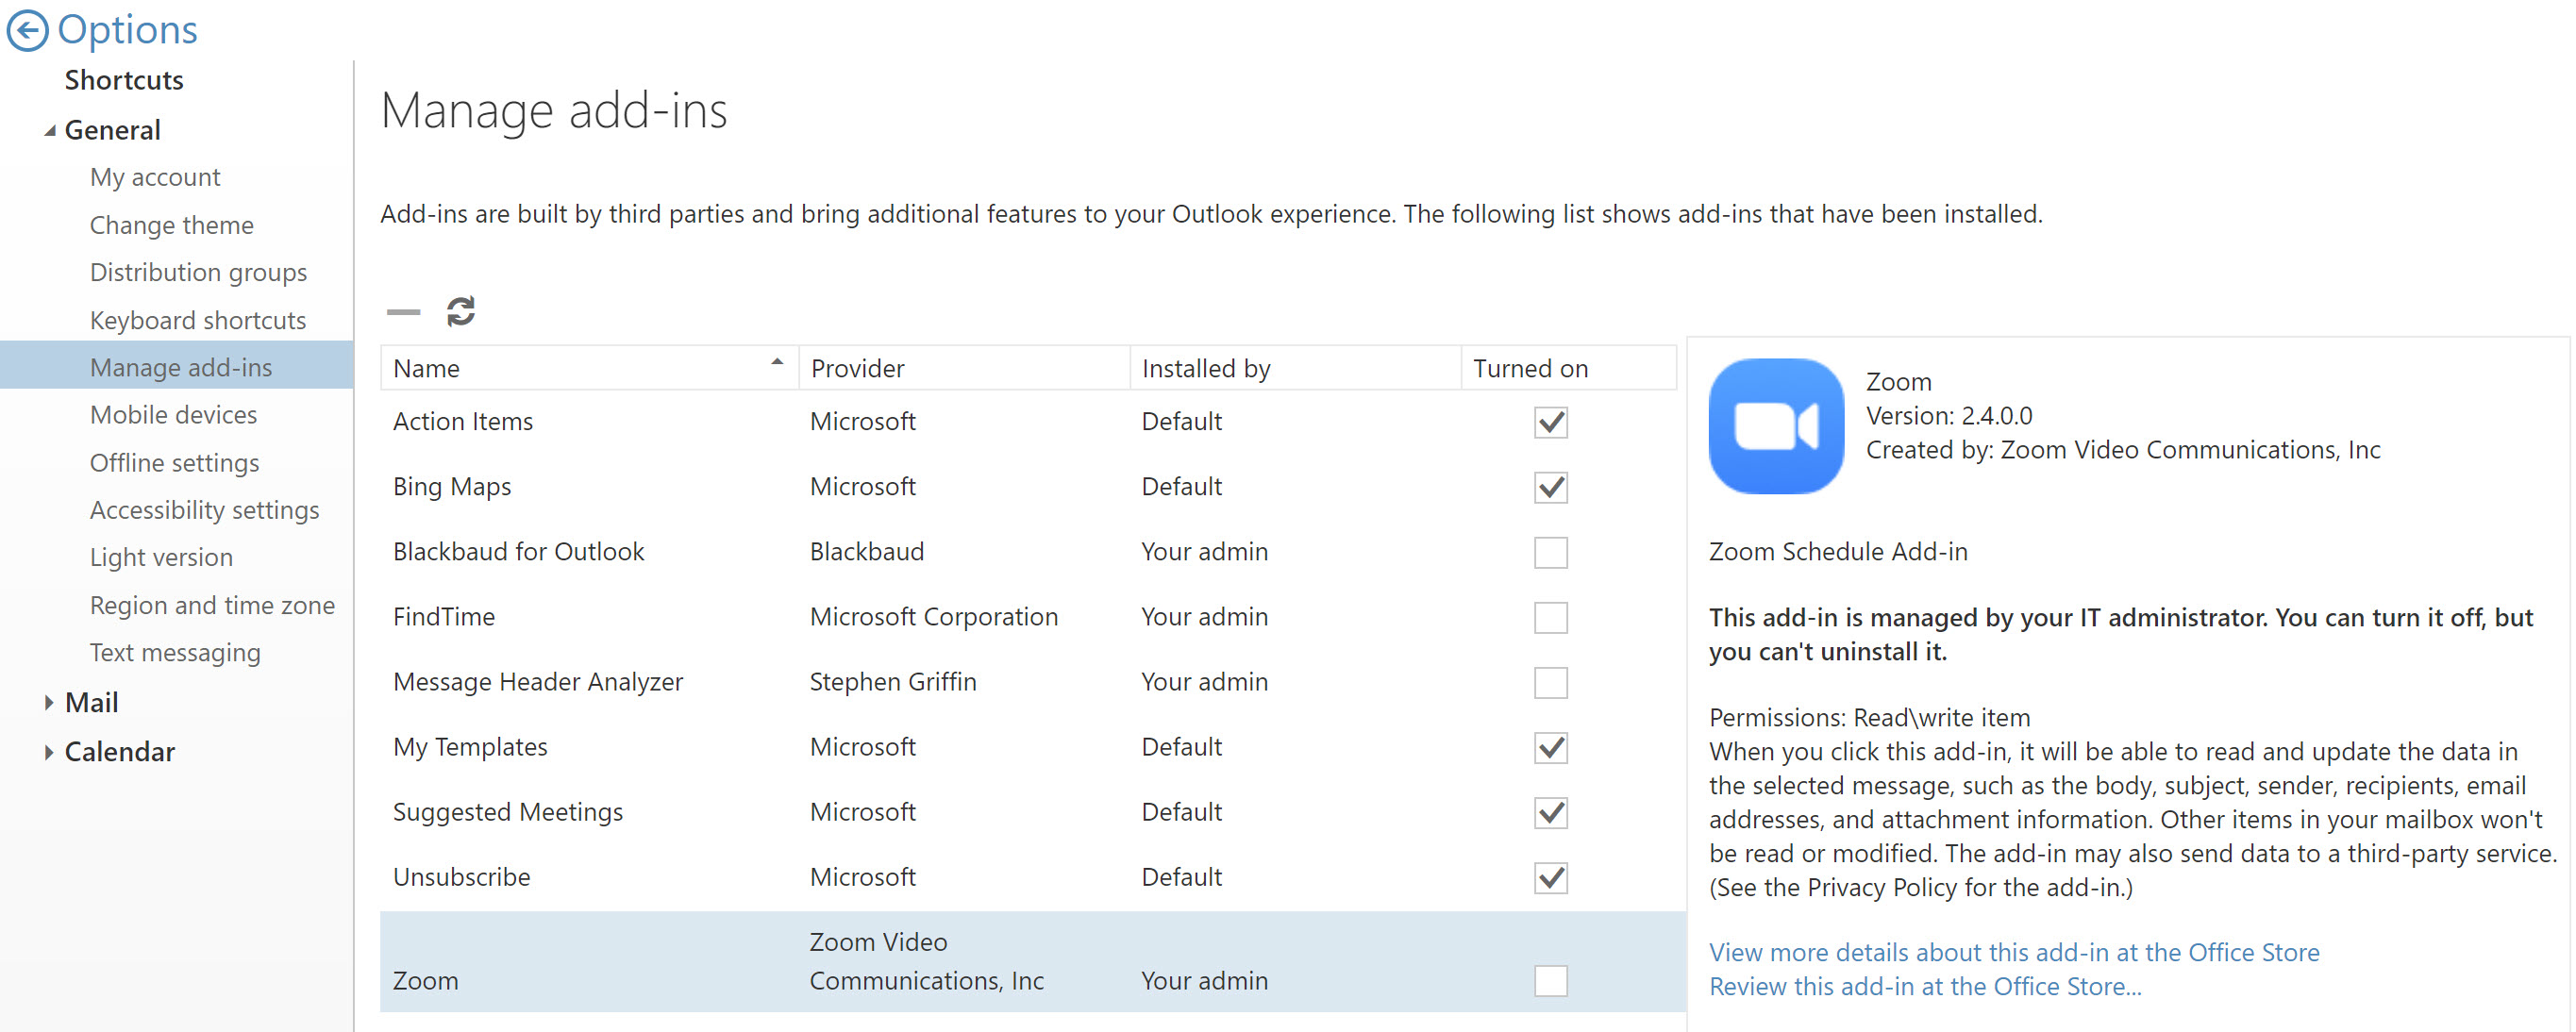 Zoom option in your manage add-ins in outlook may be unchecked